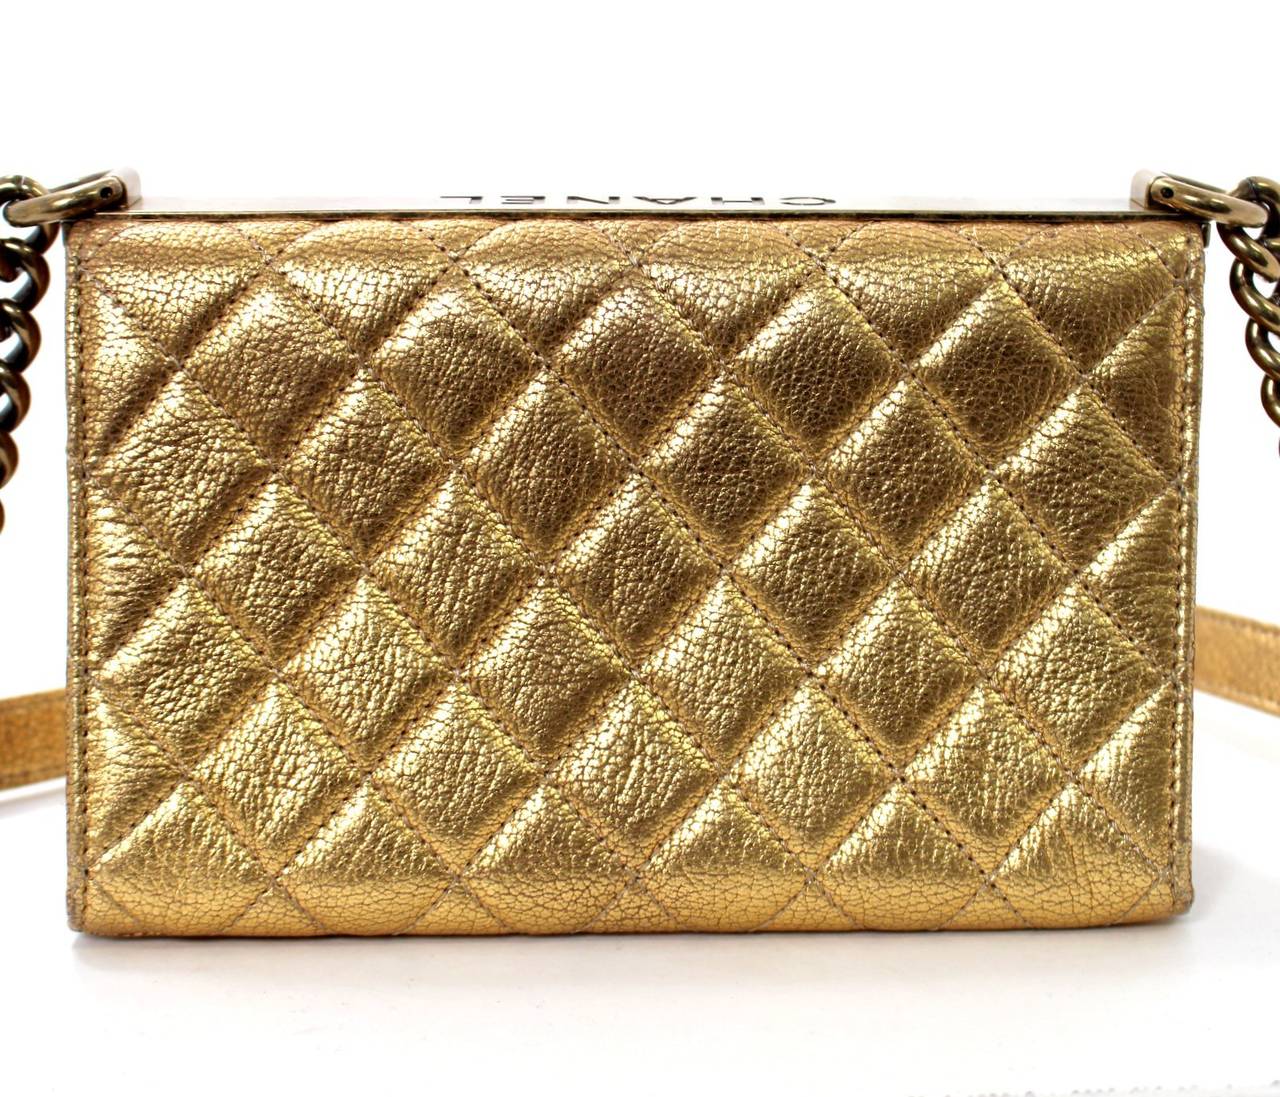 Chanel Rita Small Flap Bag in Metallic Gold Leather, MINT condition.    From the 2013 Cruise Collection, original retail was over $2,700.00 with taxes.  
Crackled metallic gold leather is quilted in signature Chanel diamond stitched pattern.